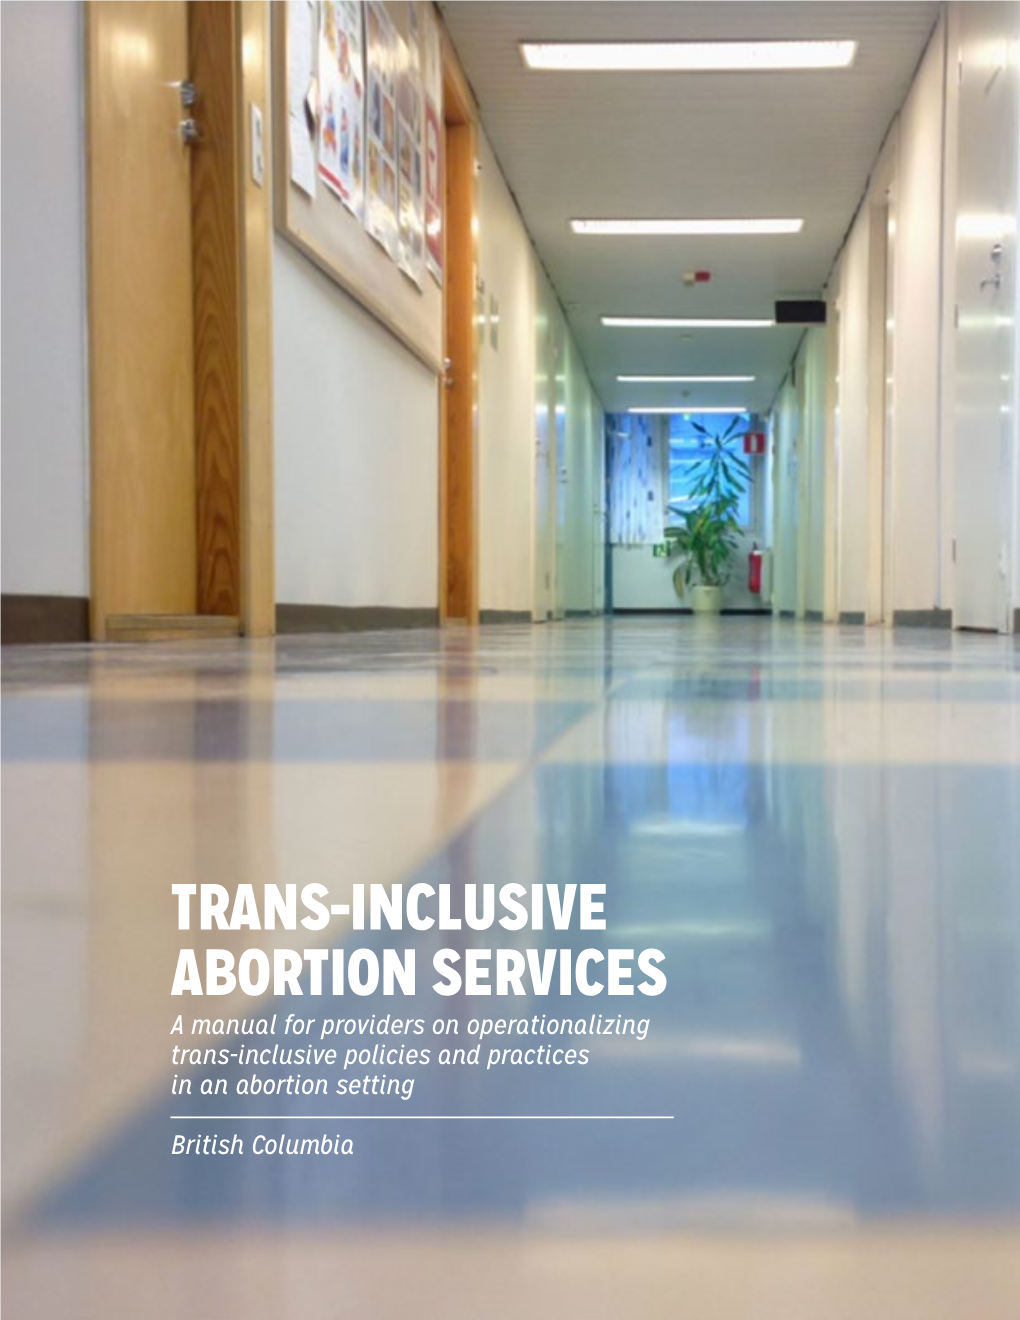 TRANS-INCLUSIVE ABORTION SERVICES a Manual for Providers on Operationalizing Trans-Inclusive Policies and Practices in an Abortion Setting